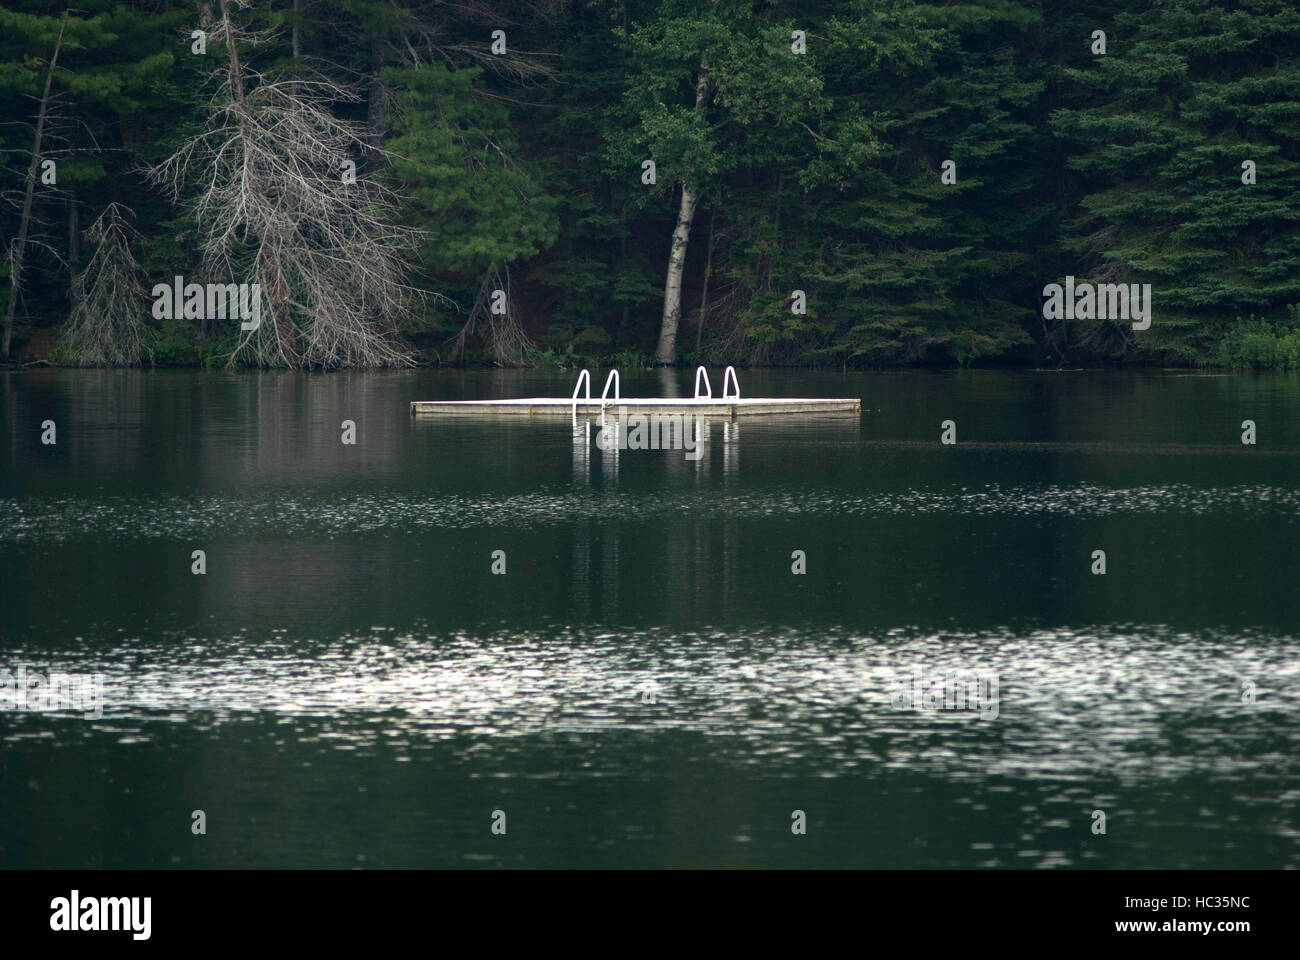 Swimming platform on a lake in Northern Ontario Stock Photo